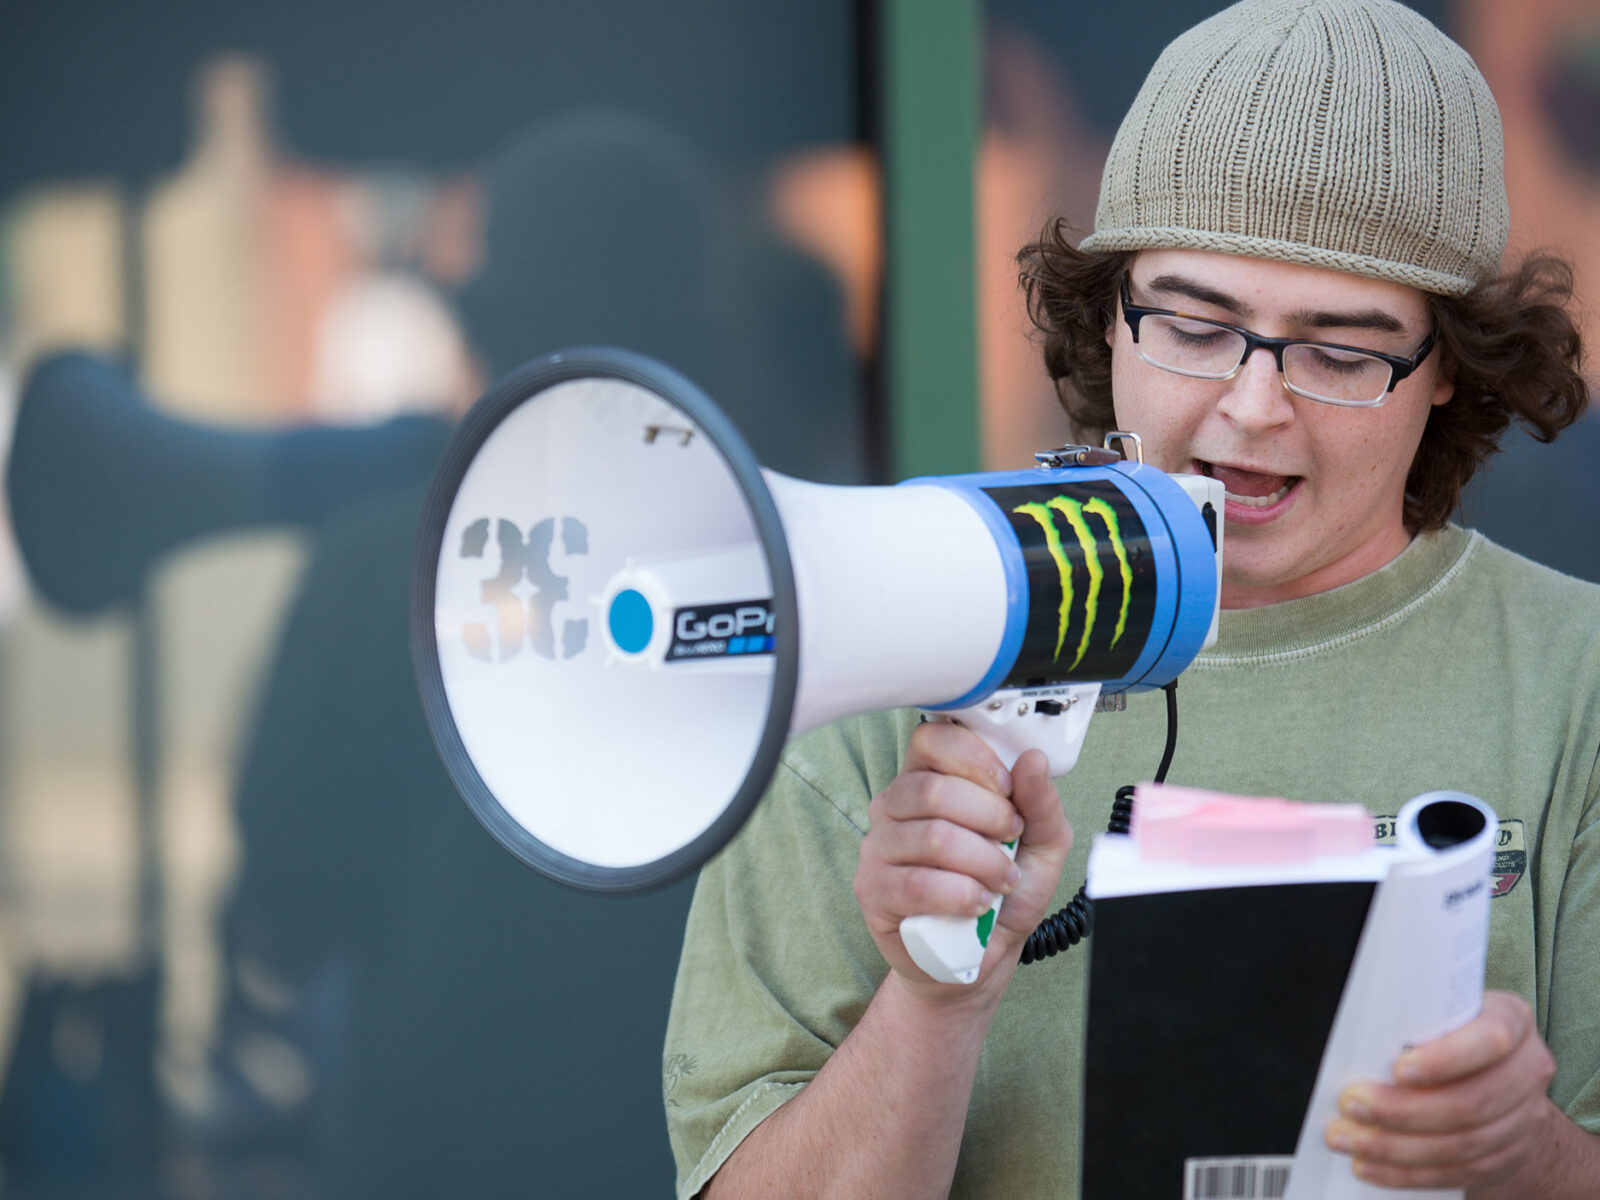 students uses a bullhorn; reads from notes